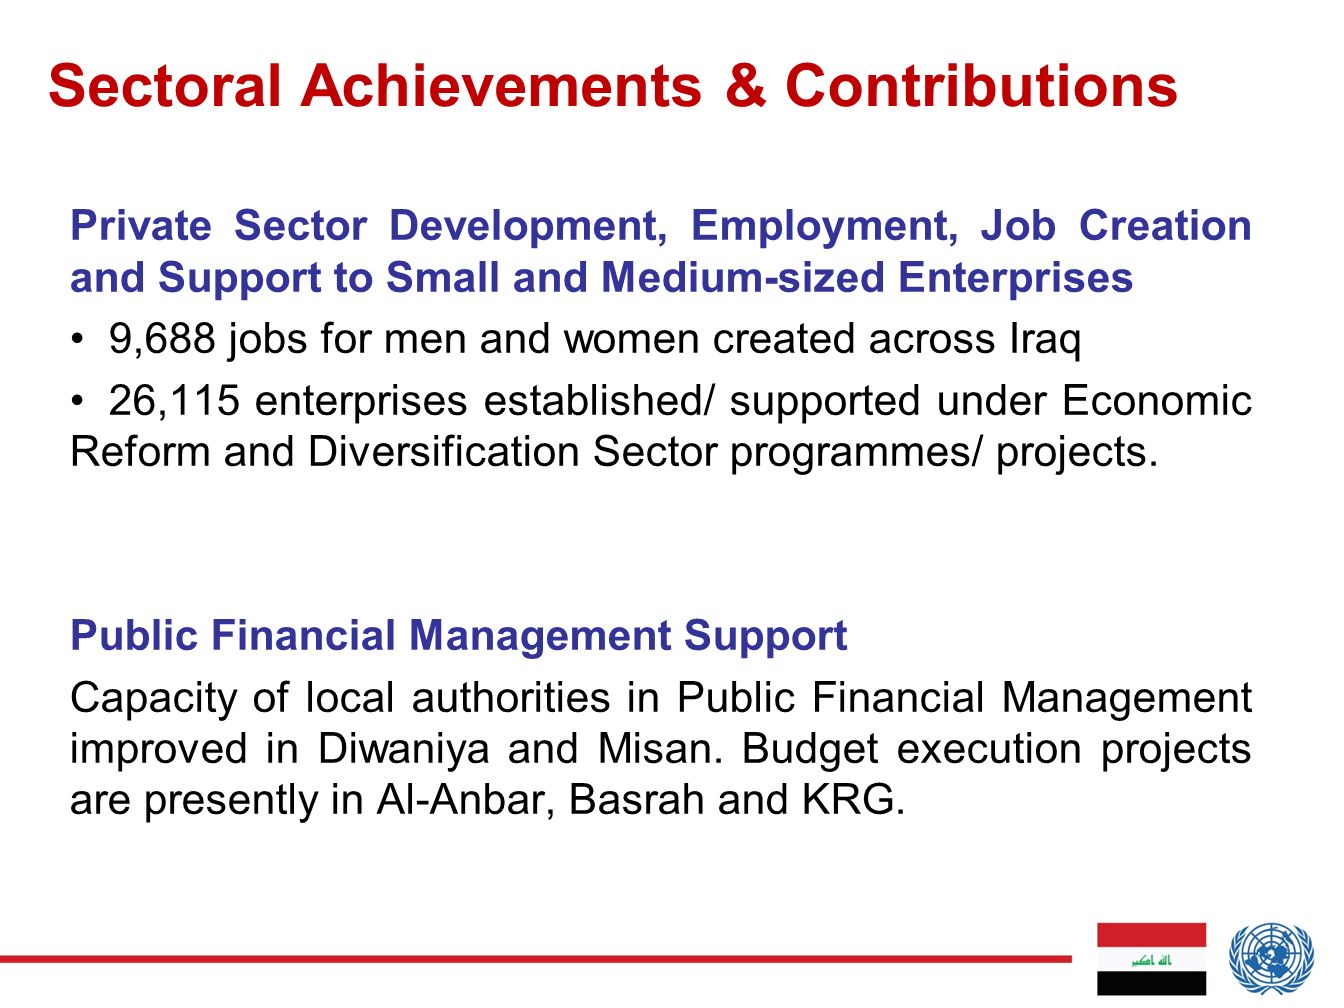 Sectoral Achievements & Contributions Private Sector Development, Employment, Job Creation and Support to Small and Medium-sized Enterprises 9,688 jobs for men and women created across Iraq 26,115 enterprises established/ supported under Economic Reform and Diversification Sector programmes/ projects.